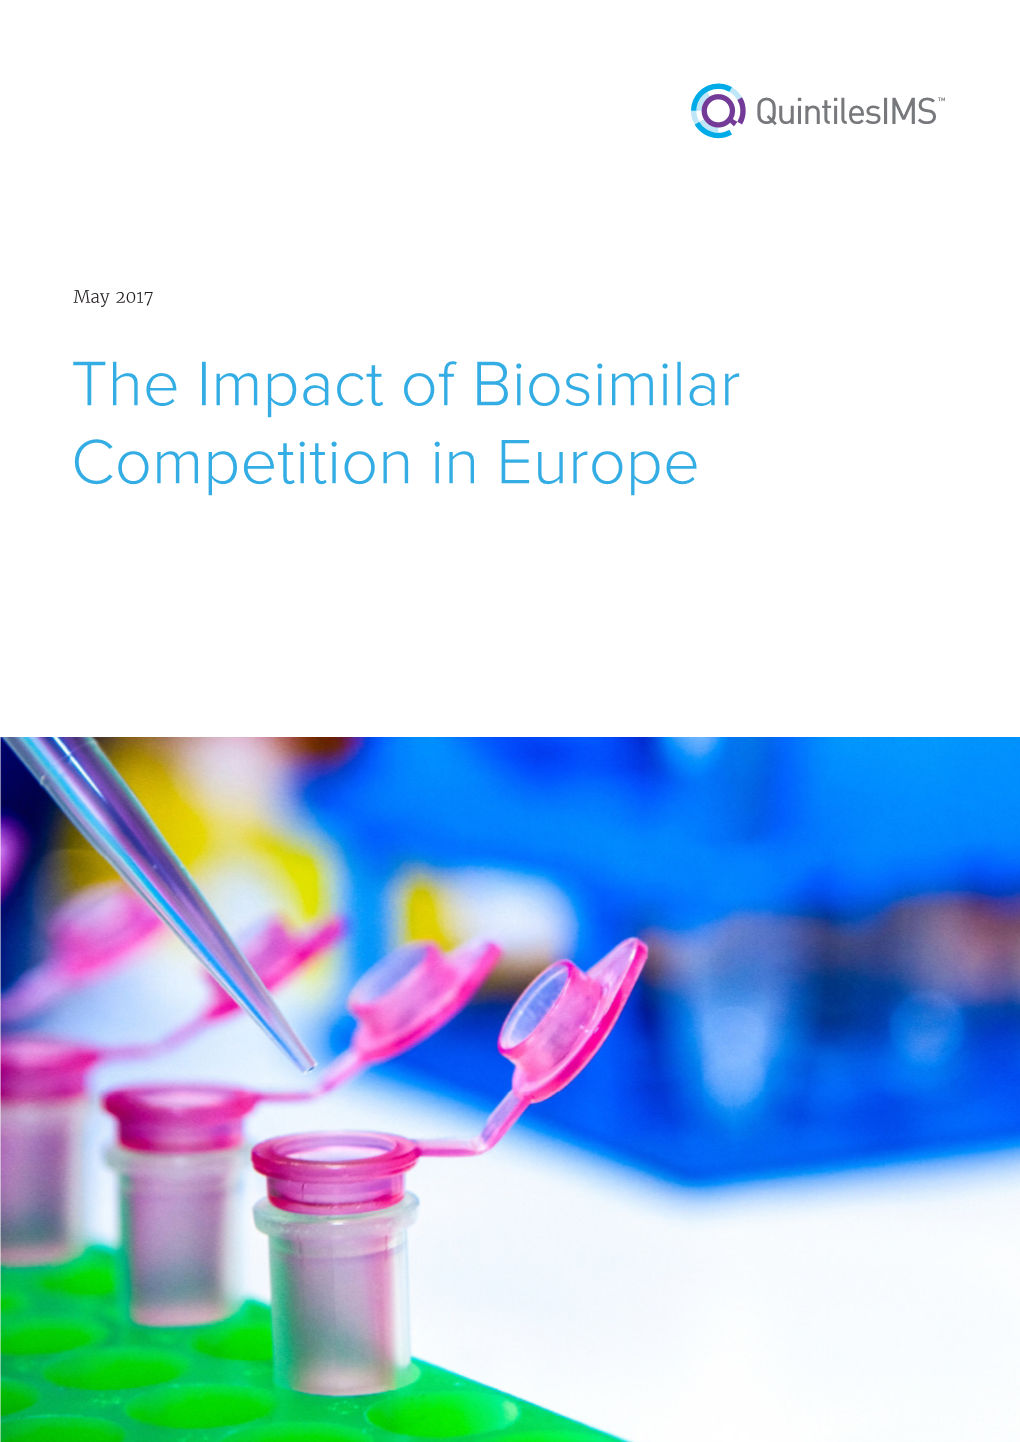 The Impact of Biosimilar Competition in Europe 2017